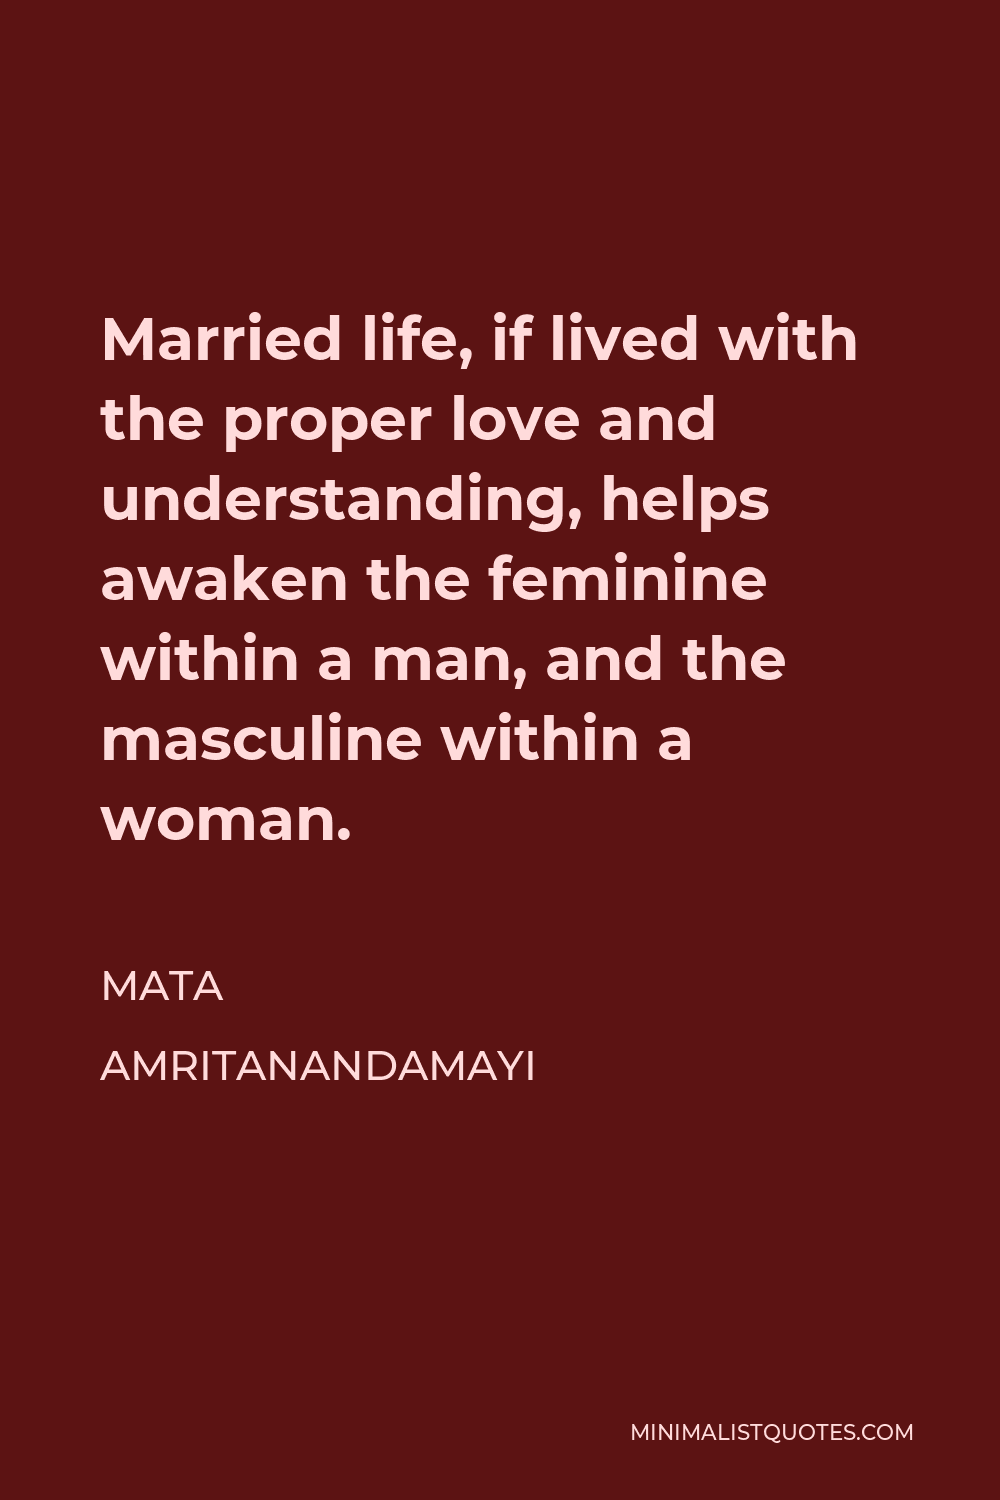 Mata Amritanandamayi Quote - Married life, if lived with the proper love and understanding, helps awaken the feminine within a man, and the masculine within a woman.